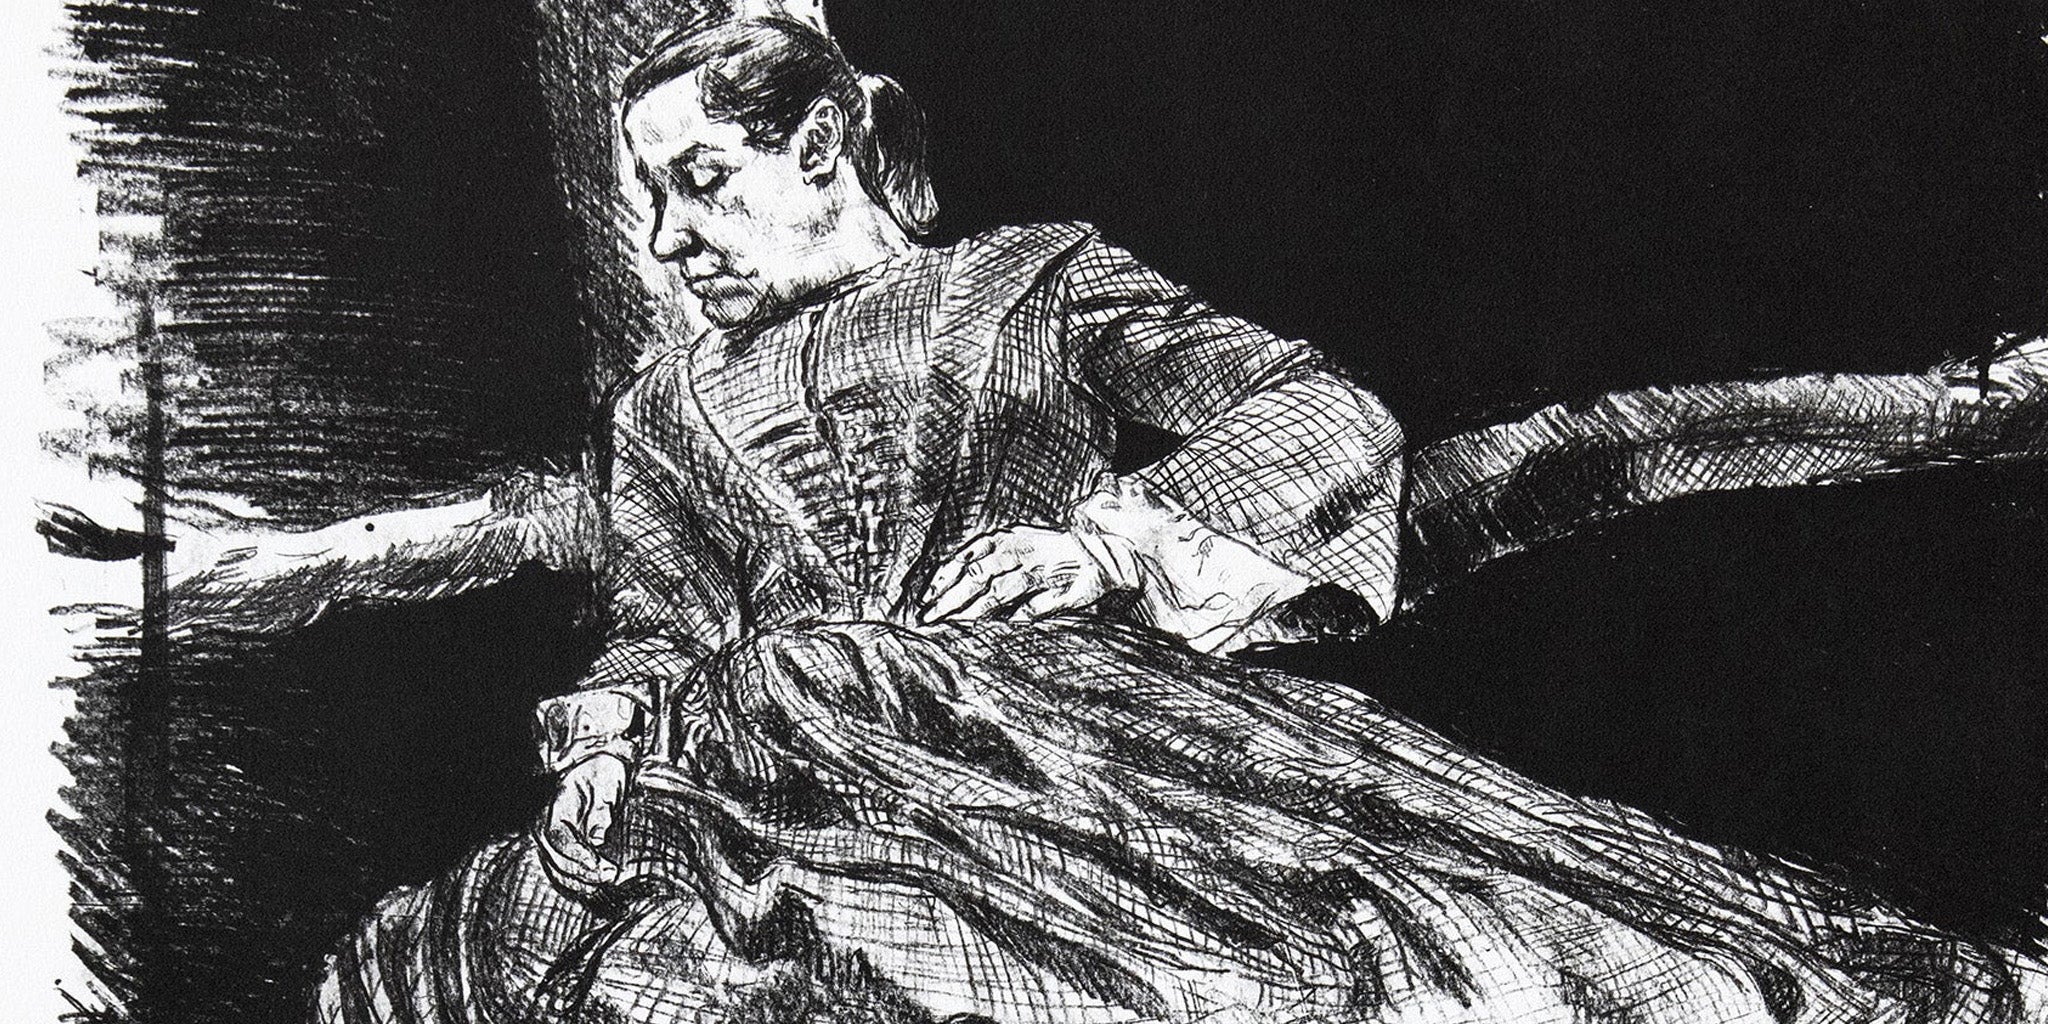 Detail from Up the Tree, Jane Eyre suite by Paula Rego